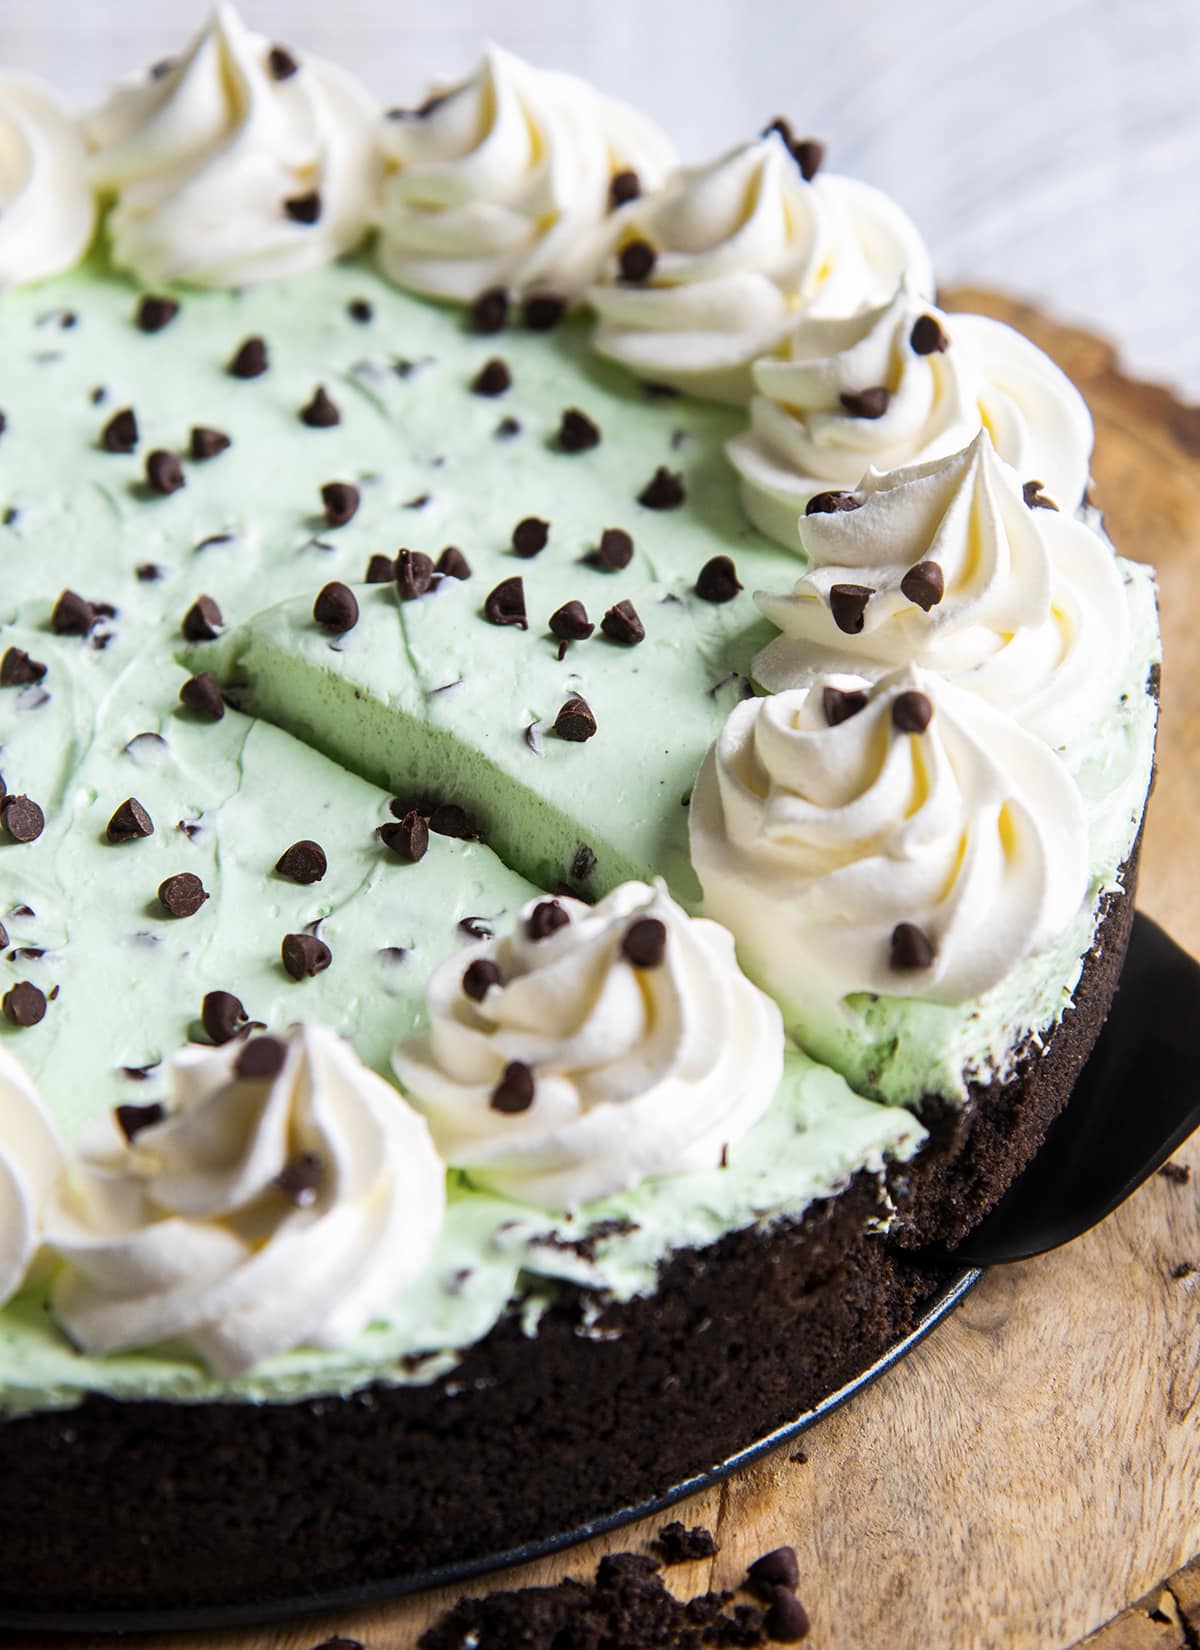 A slice of mint chocolate cheesecake being lifted out of the cheesecake on a pie server.